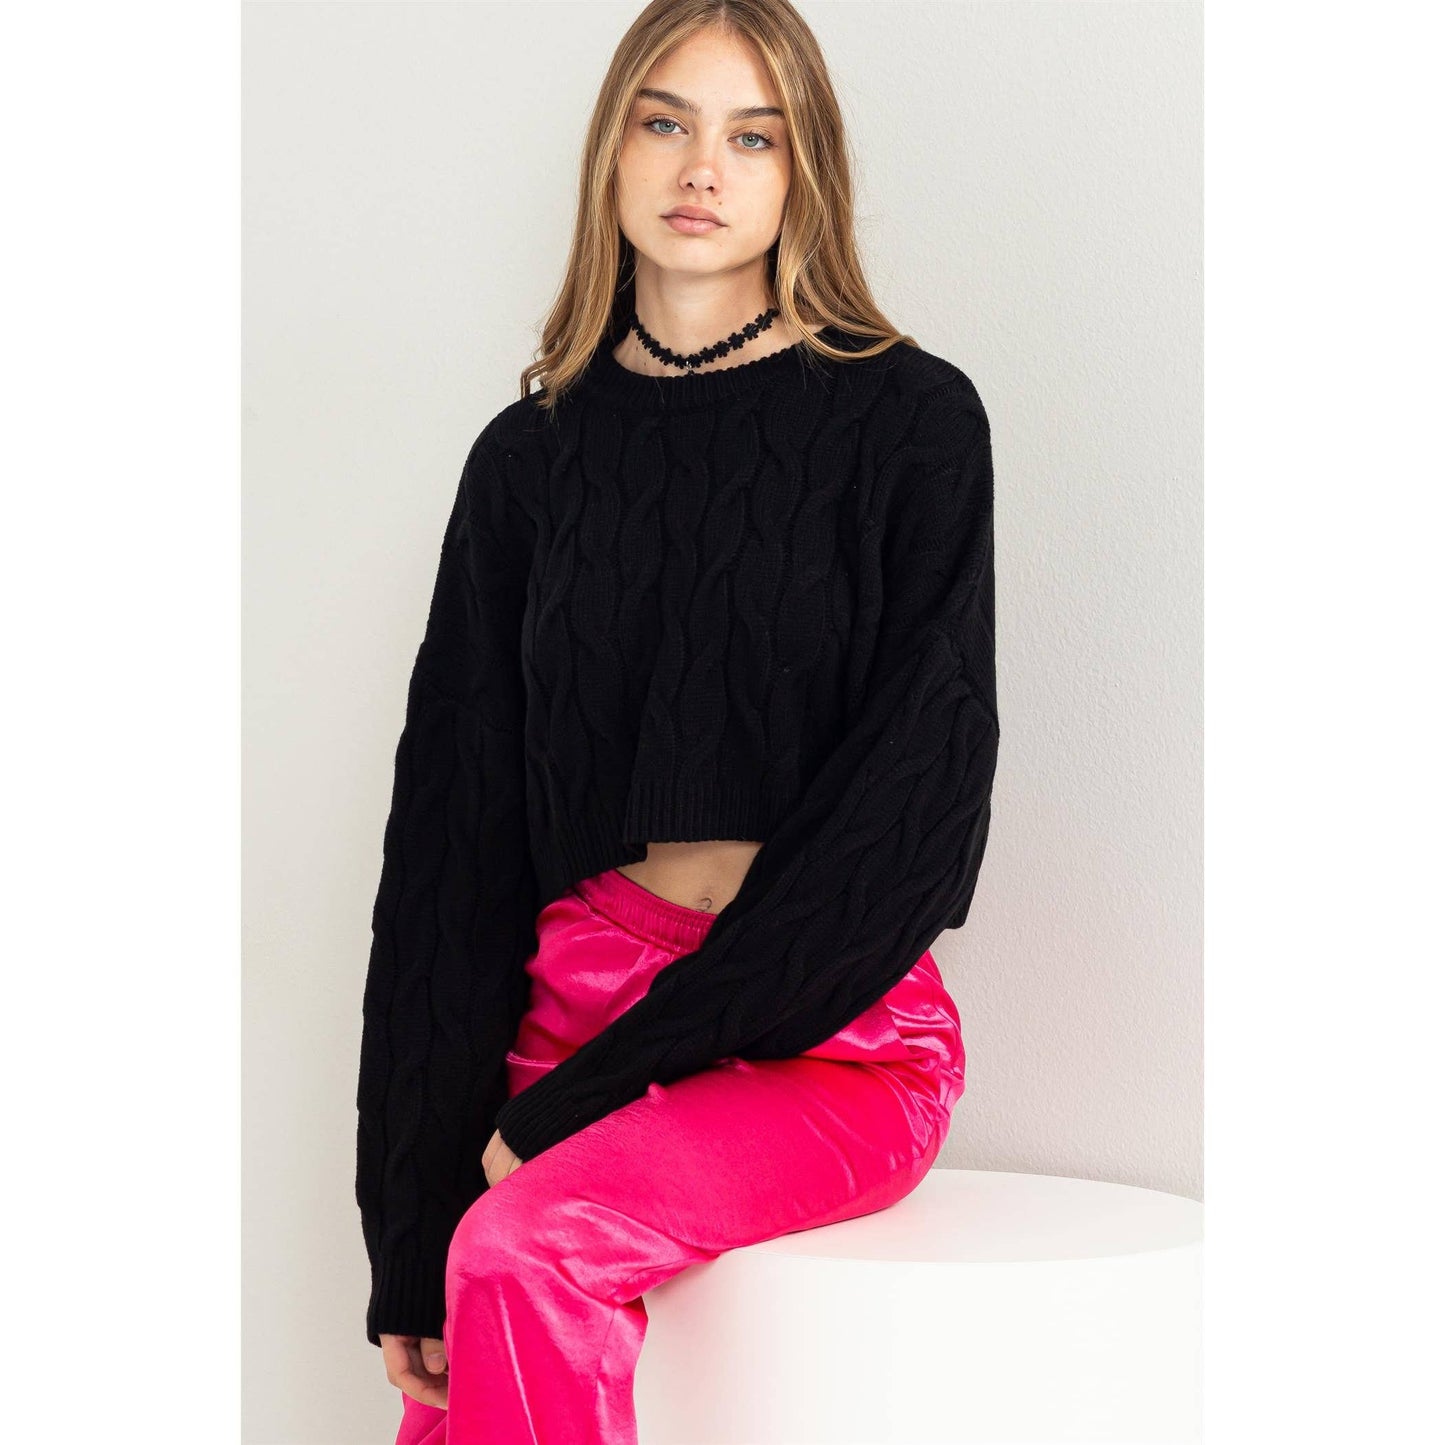 WEEKEND READY CABLE KNIT LONG SLEEVE CROP SWEATER: WISTERIA / L